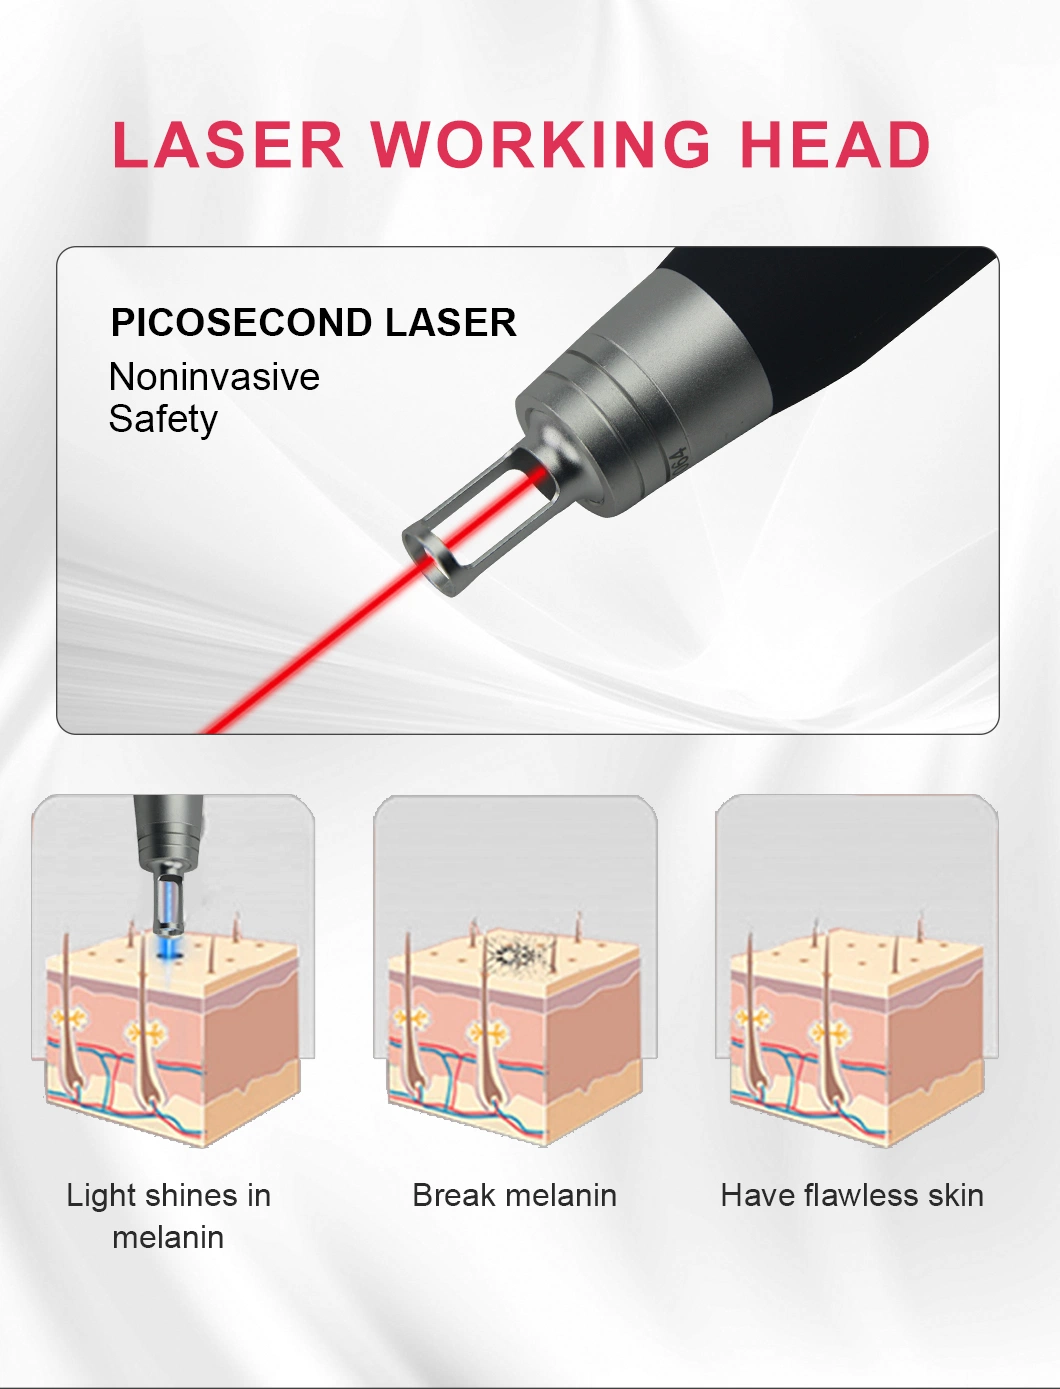 Professional Improve Skin Texture Scars and Acne Marks Picosecond Laser Machine